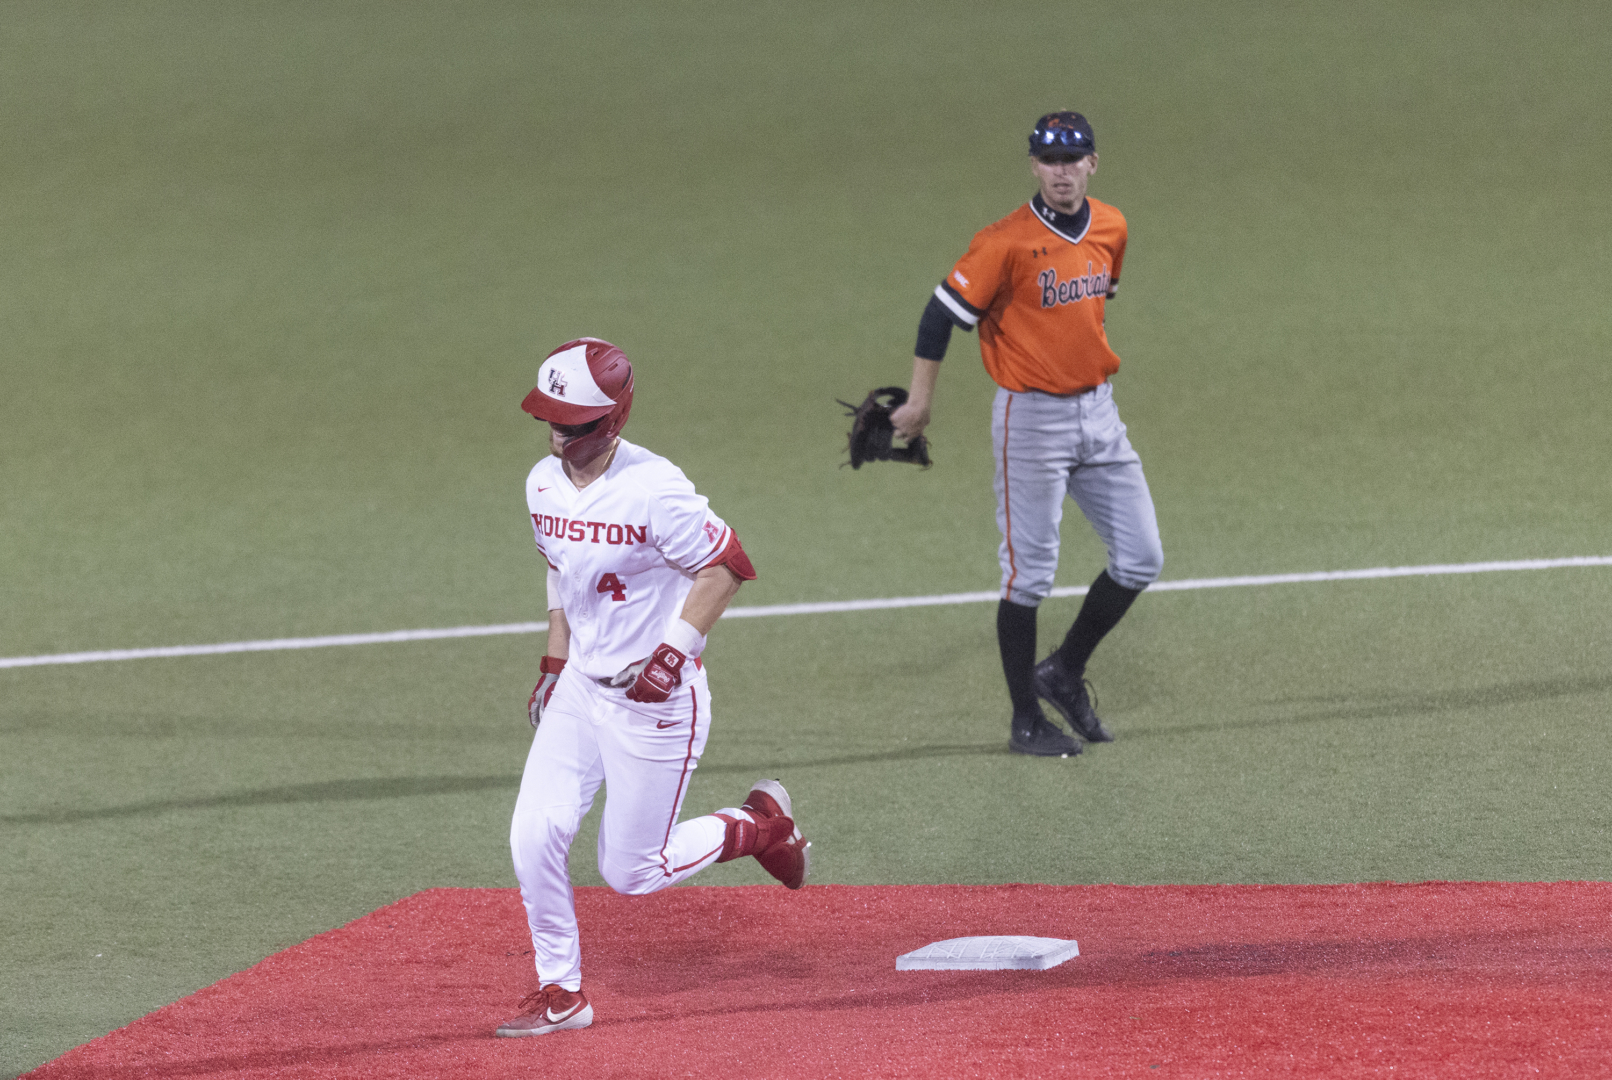 Brandon Uhse was all smiles as he rounded the bases after his three-run shot in the eighth to lift UH baseball over Sam Houston State on Tuesday night at Schroeder Park. | Courtesy of Thomas Shea/UH athletics